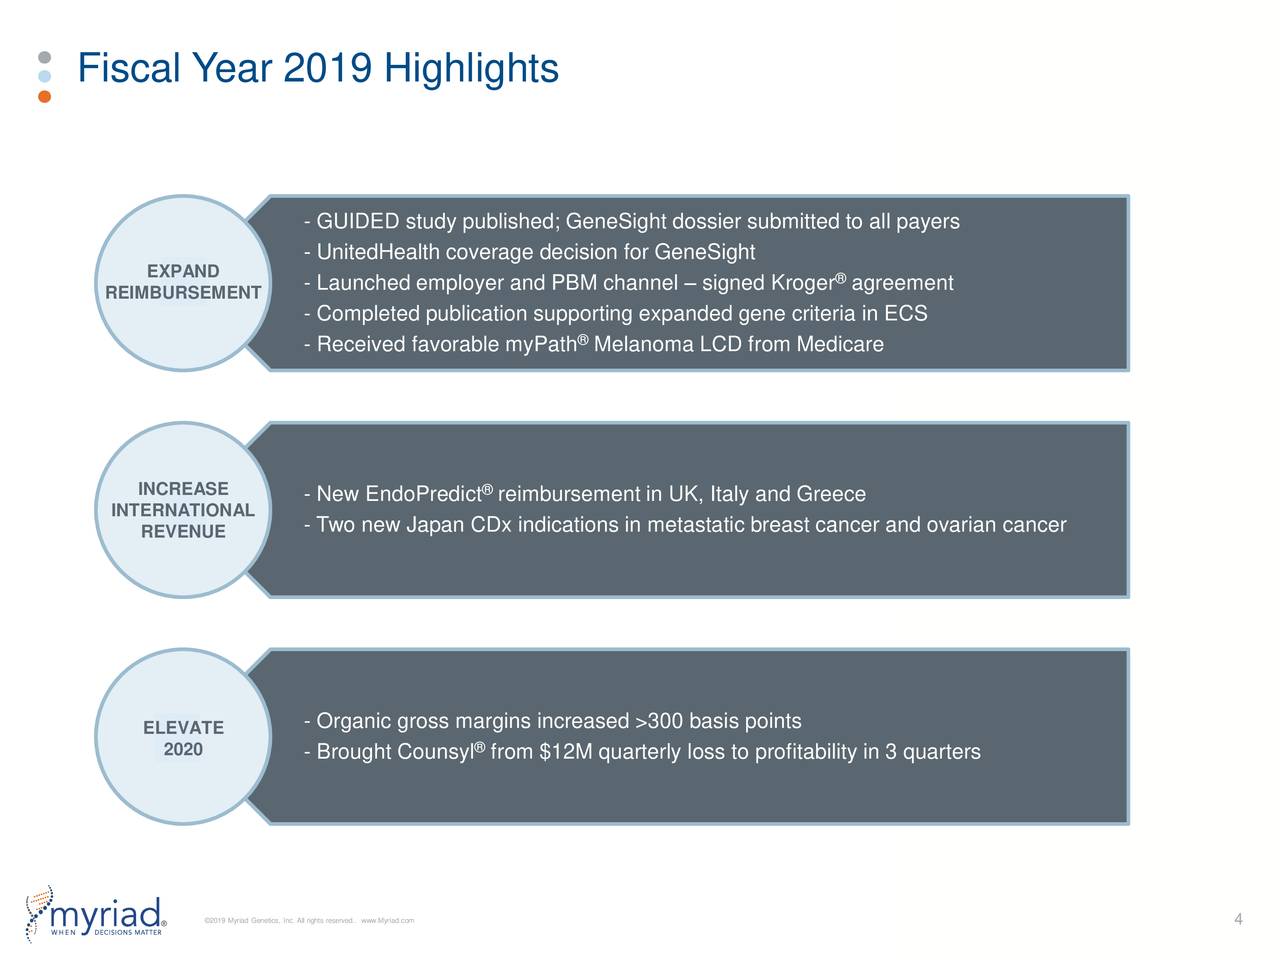 Fiscal Year 2019 Highlights